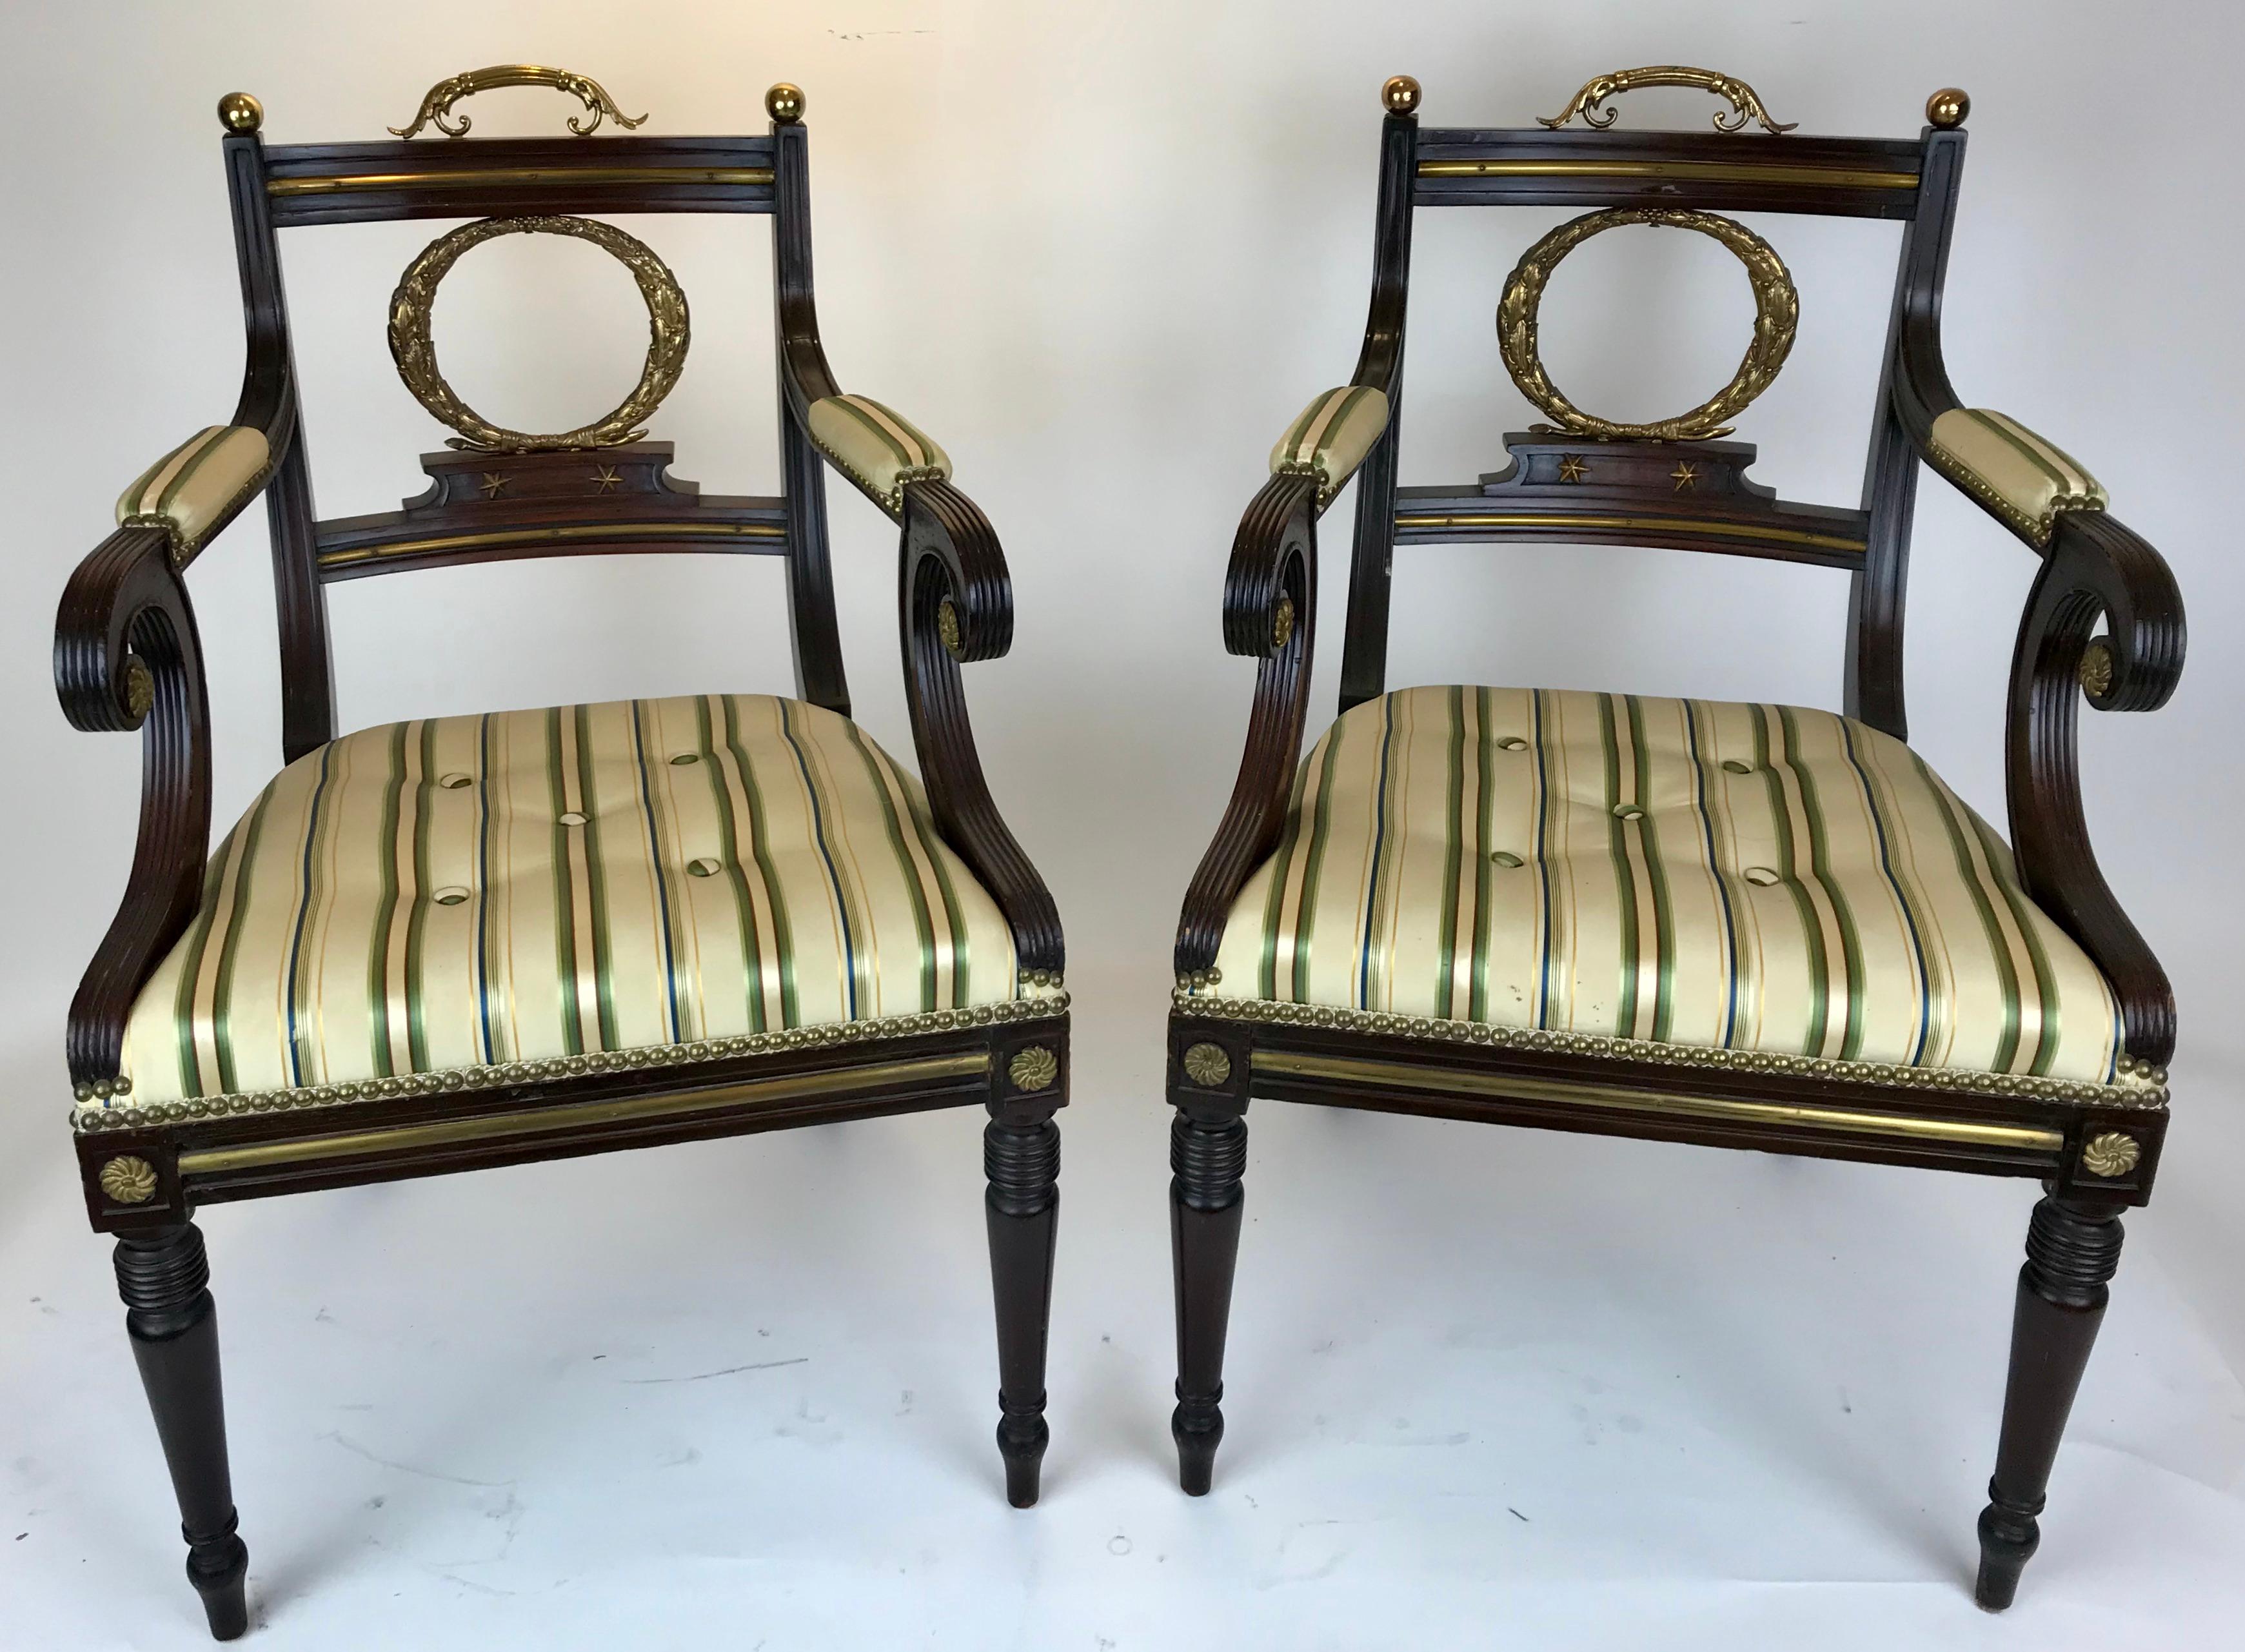 This set of eight English Regency dining chairs include two armchairs with scrolled arms. Each backrest features a gilt bronze lifting handle and oak leaf wreath form splat. The strait front upholstered seats are raised on tapered legs terminating